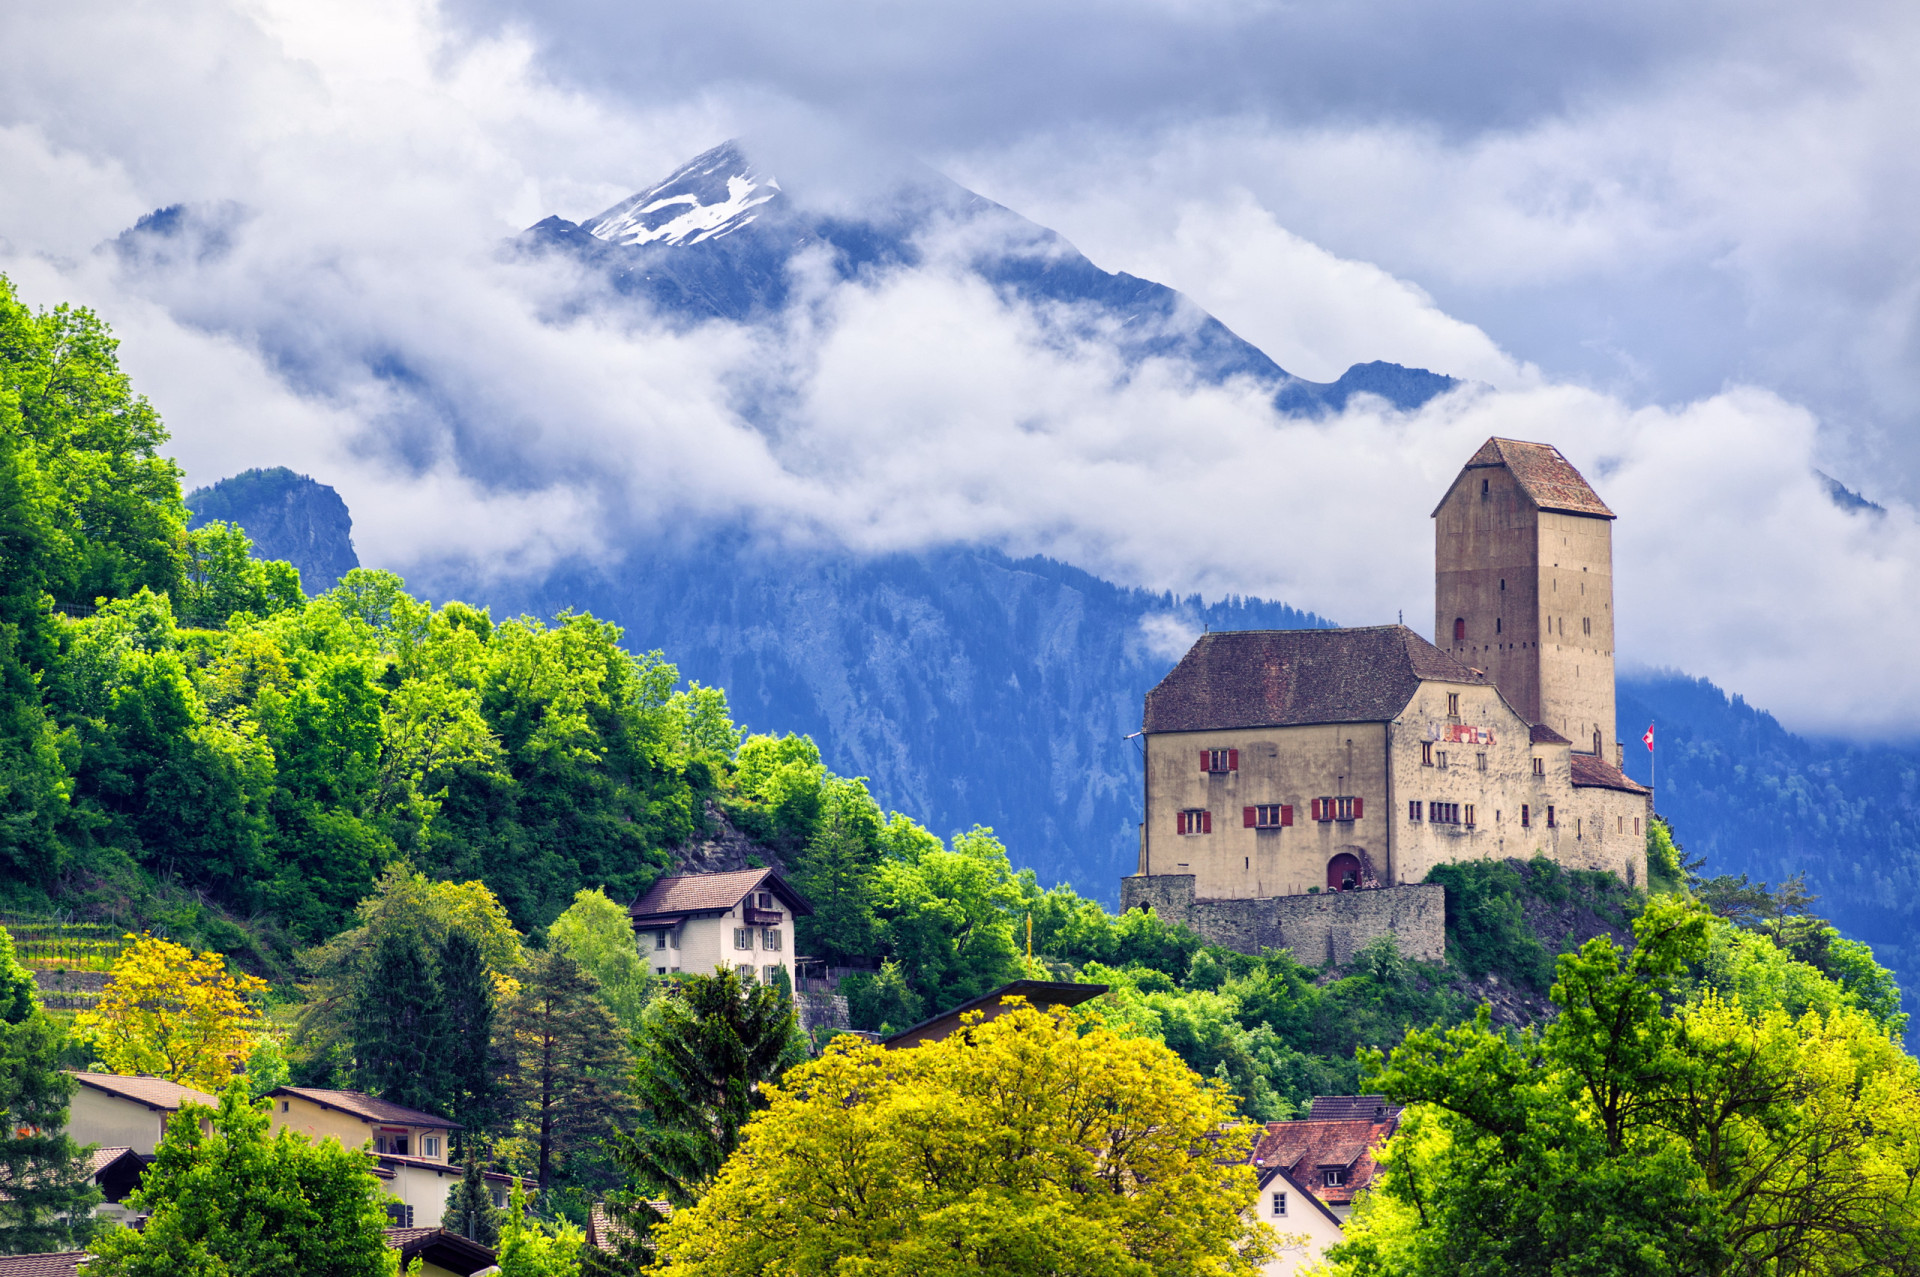 <p>After leaving the helicopter behind in Luxembourg and chartering another airplane, you can travel to the Swiss city of St. Gallen within an hour. Once you land, you would have to quickly jump into a rented car and make your way to the next stop.</p><p><a href="https://www.msn.com/en-us/community/channel/vid-7xx8mnucu55yw63we9va2gwr7uihbxwc68fxqp25x6tg4ftibpra?cvid=94631541bc0f4f89bfd59158d696ad7e">Follow us and access great exclusive content every day</a></p>